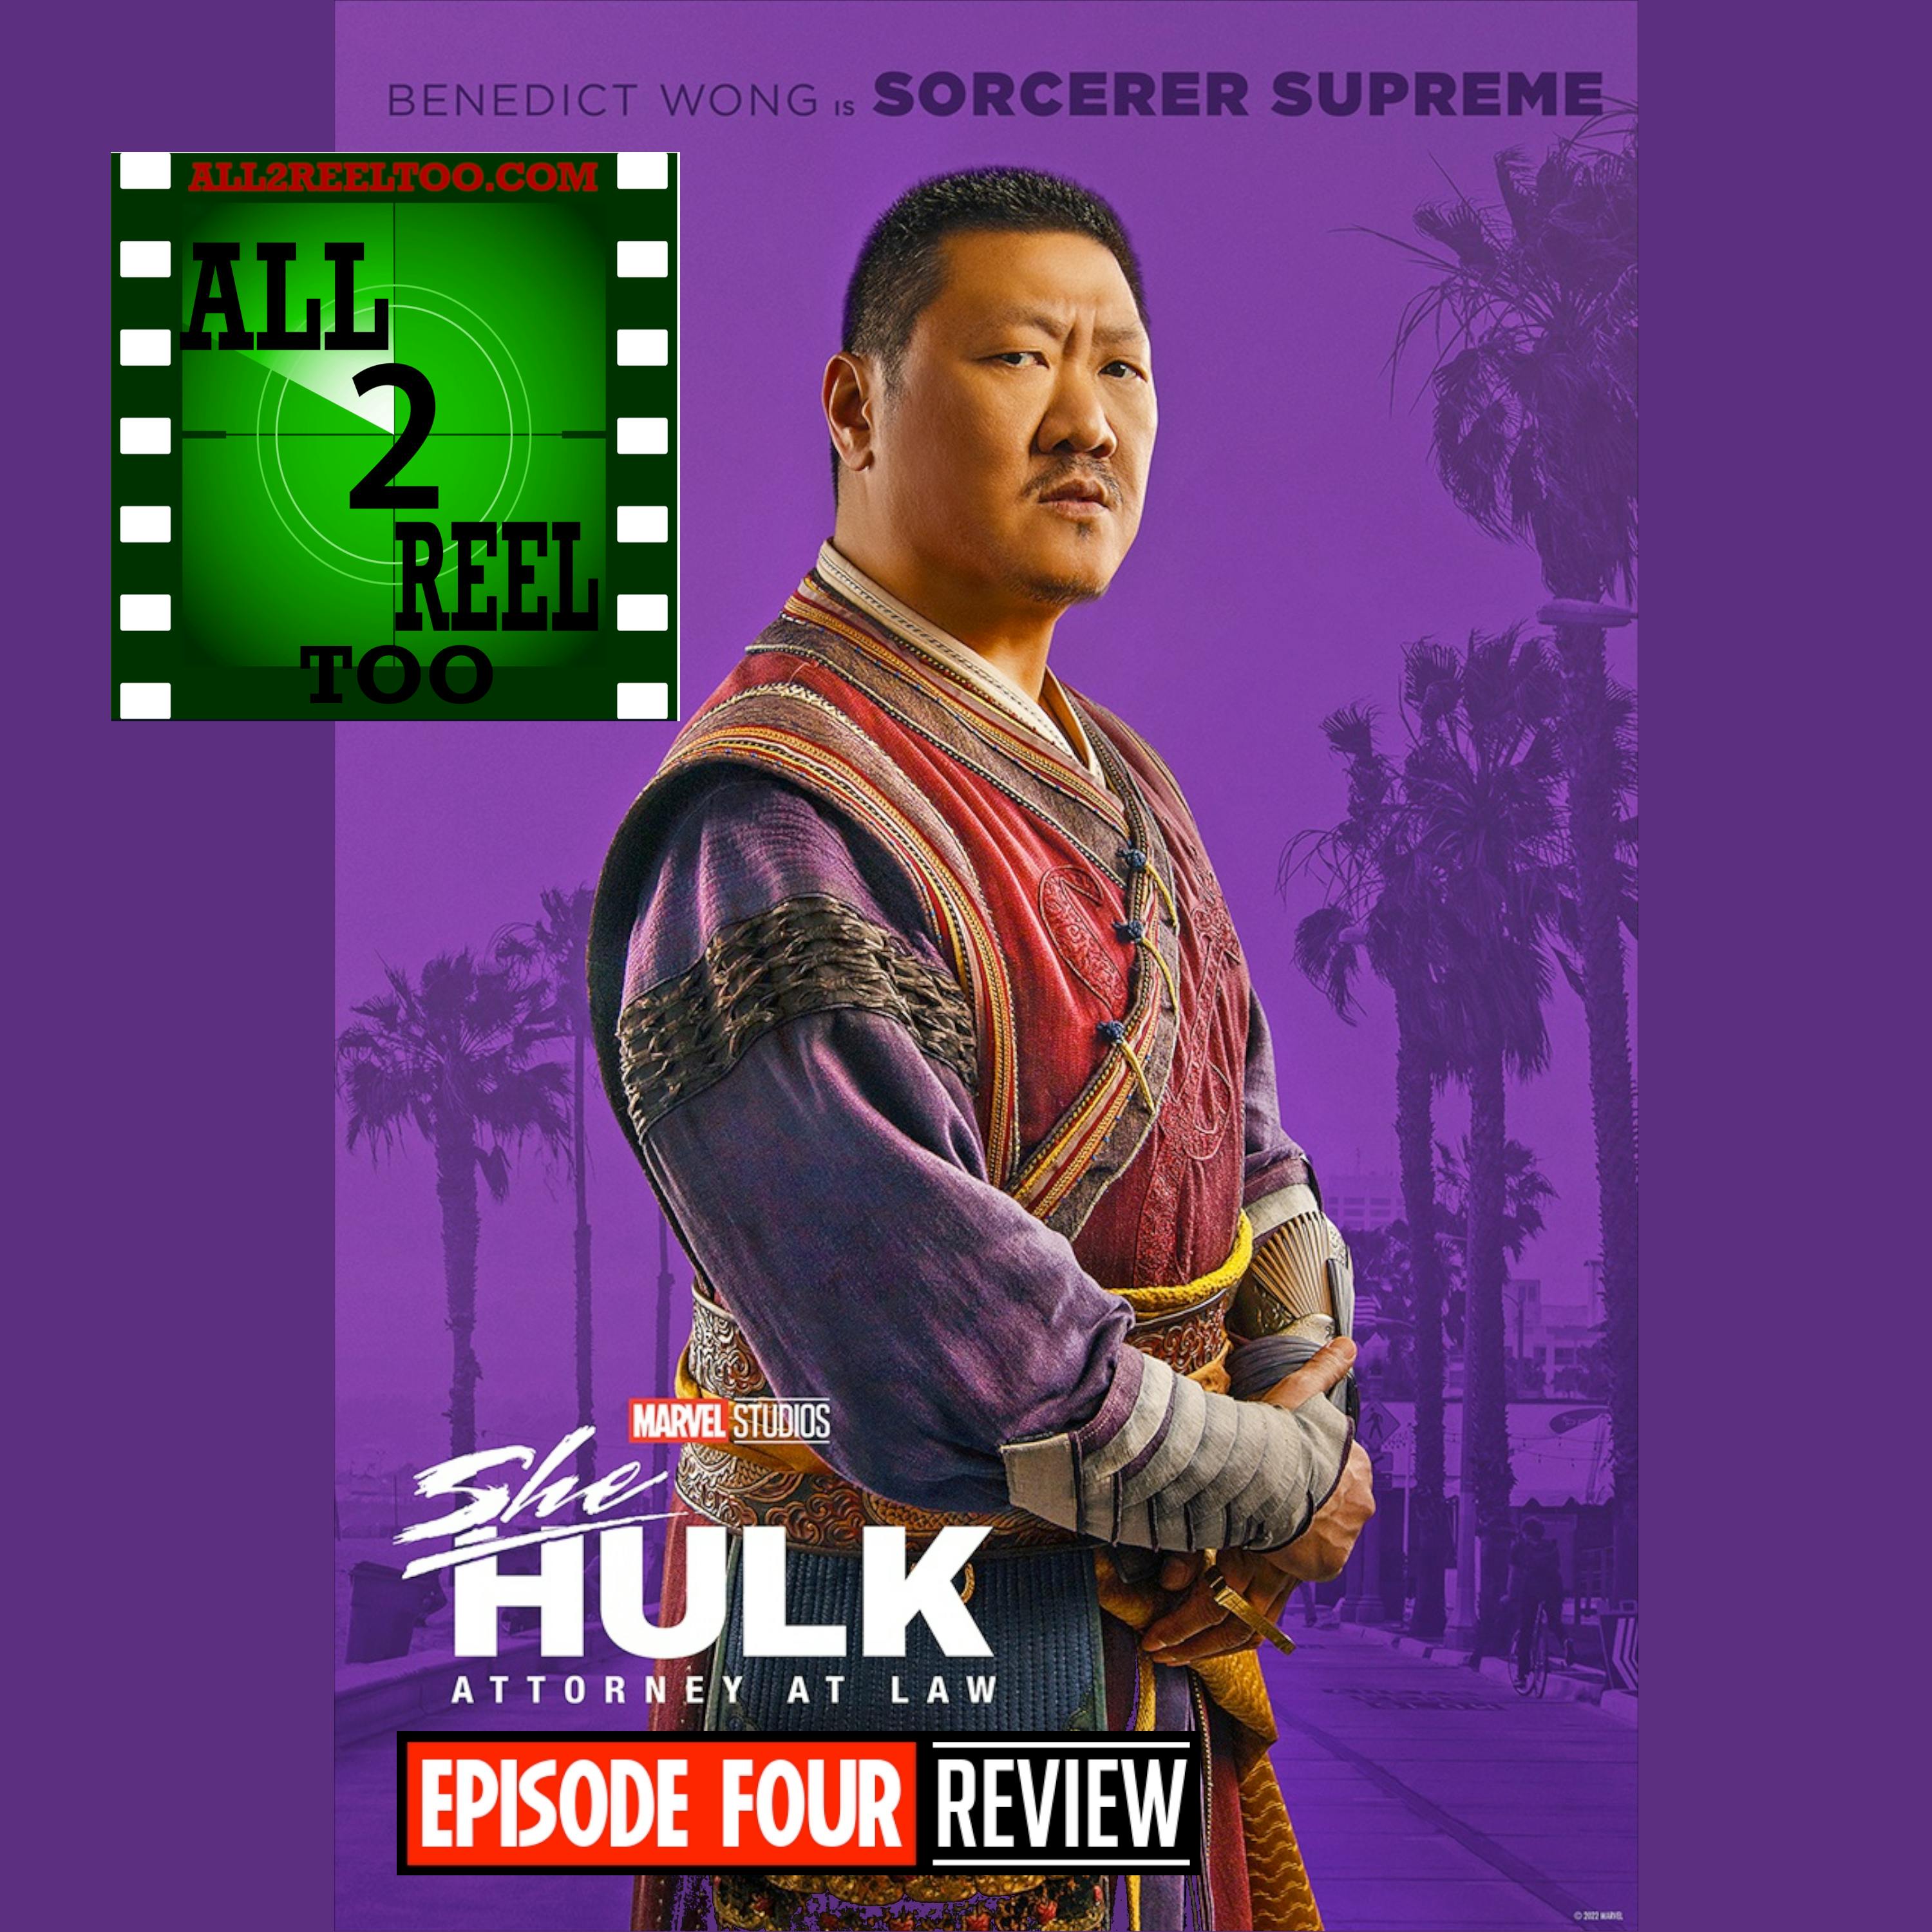 She-Hulk: Attorney at Law - EPISODE 4 REVIEW Image